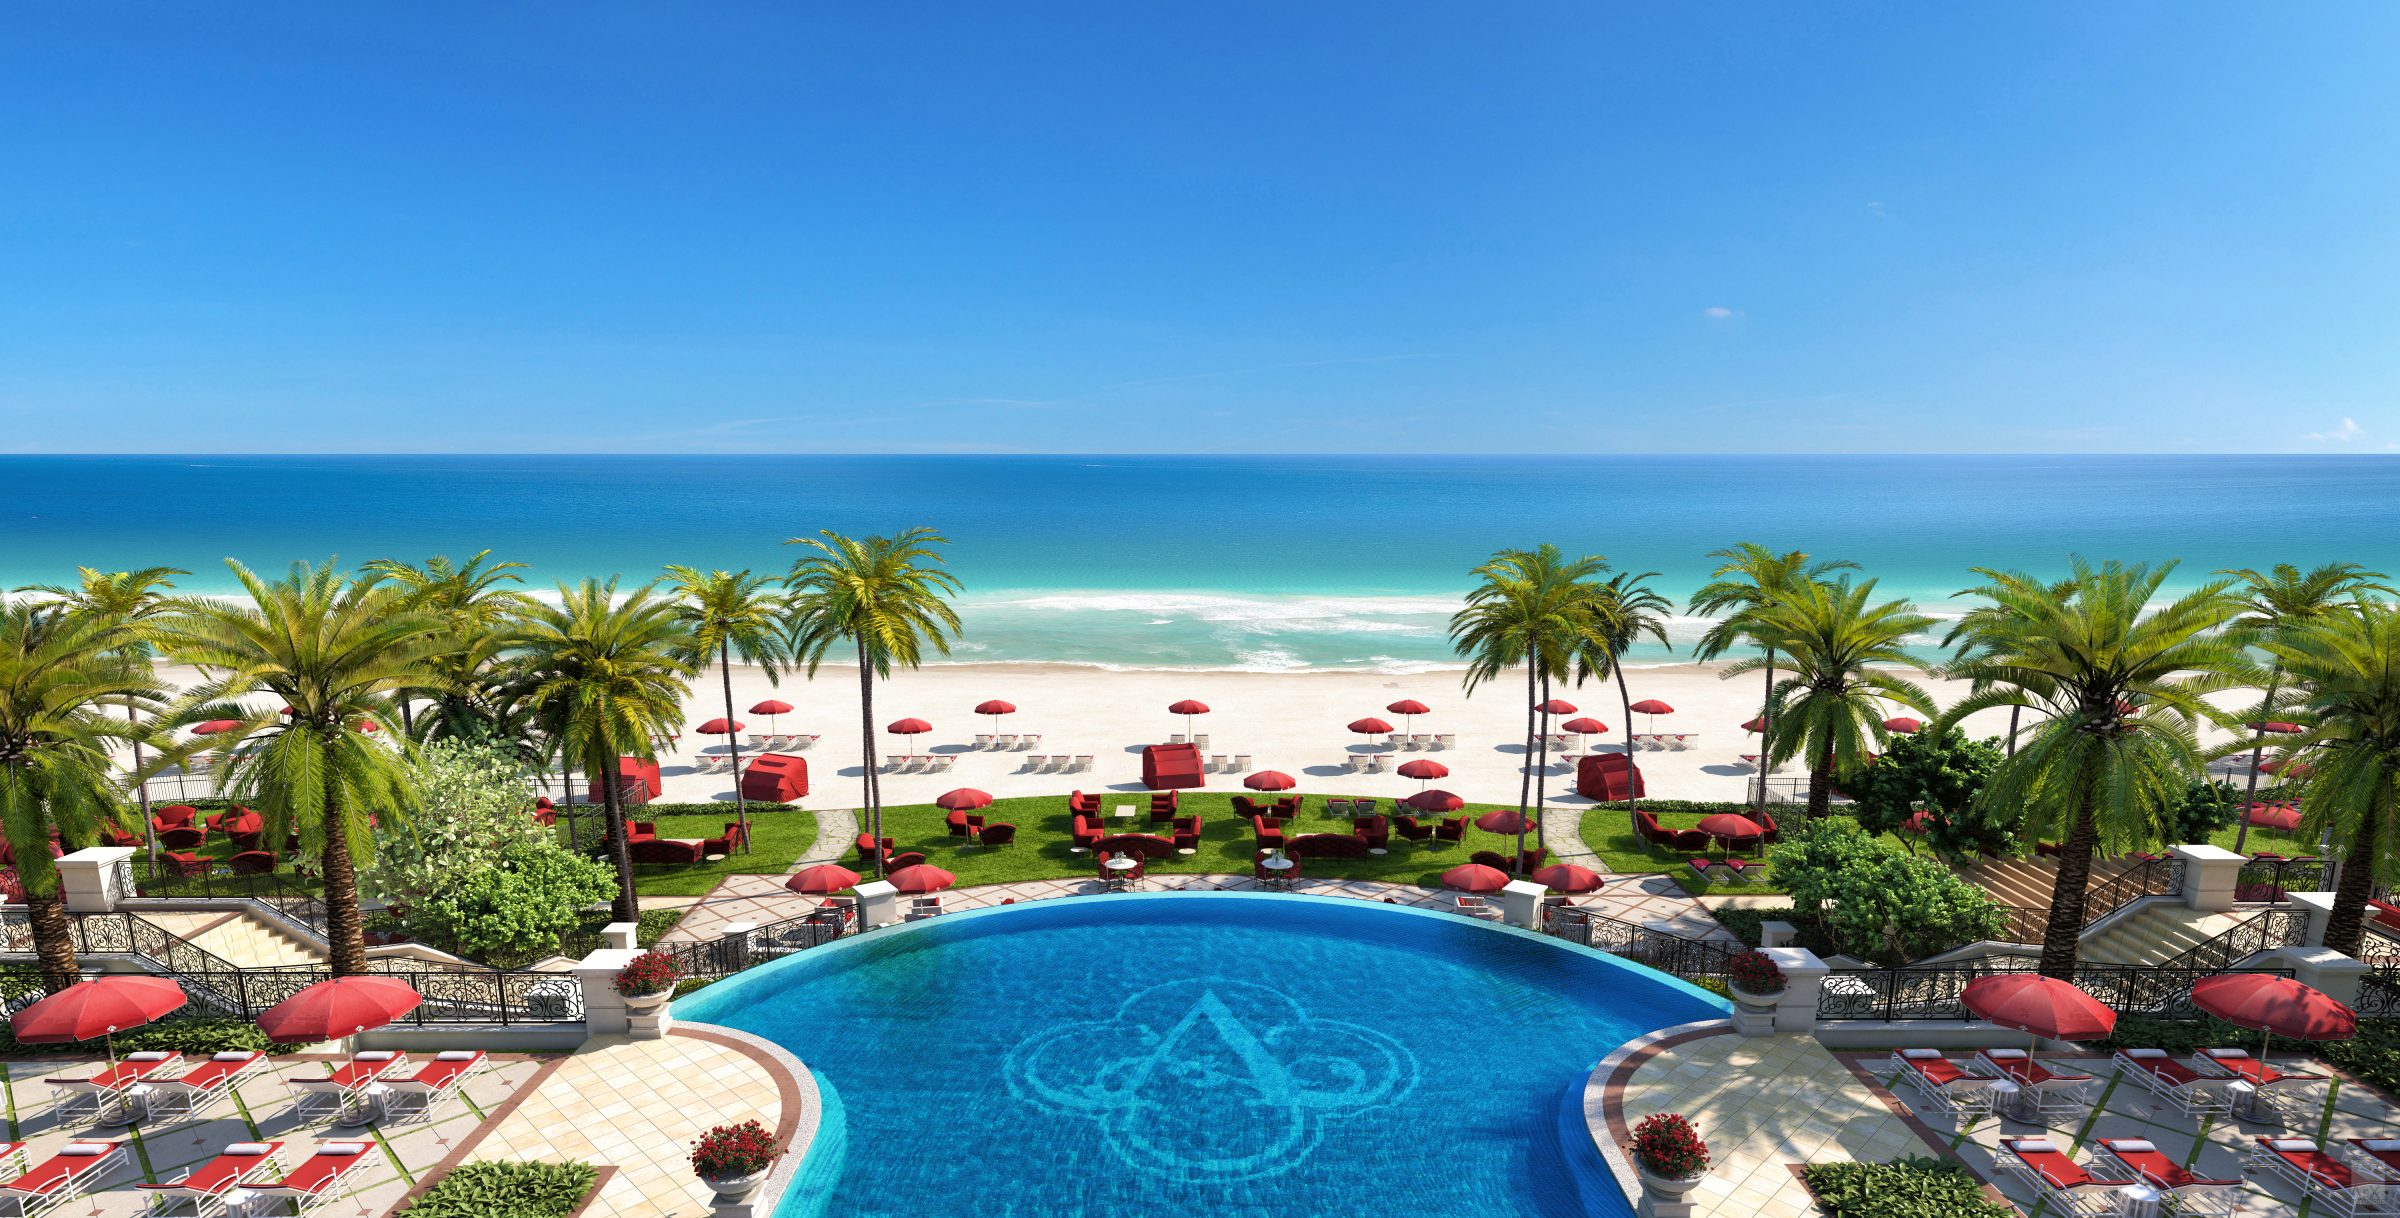 THE ESTATES AT ACQUALINA: EXPERIENCE UNMATCHED LUXURY